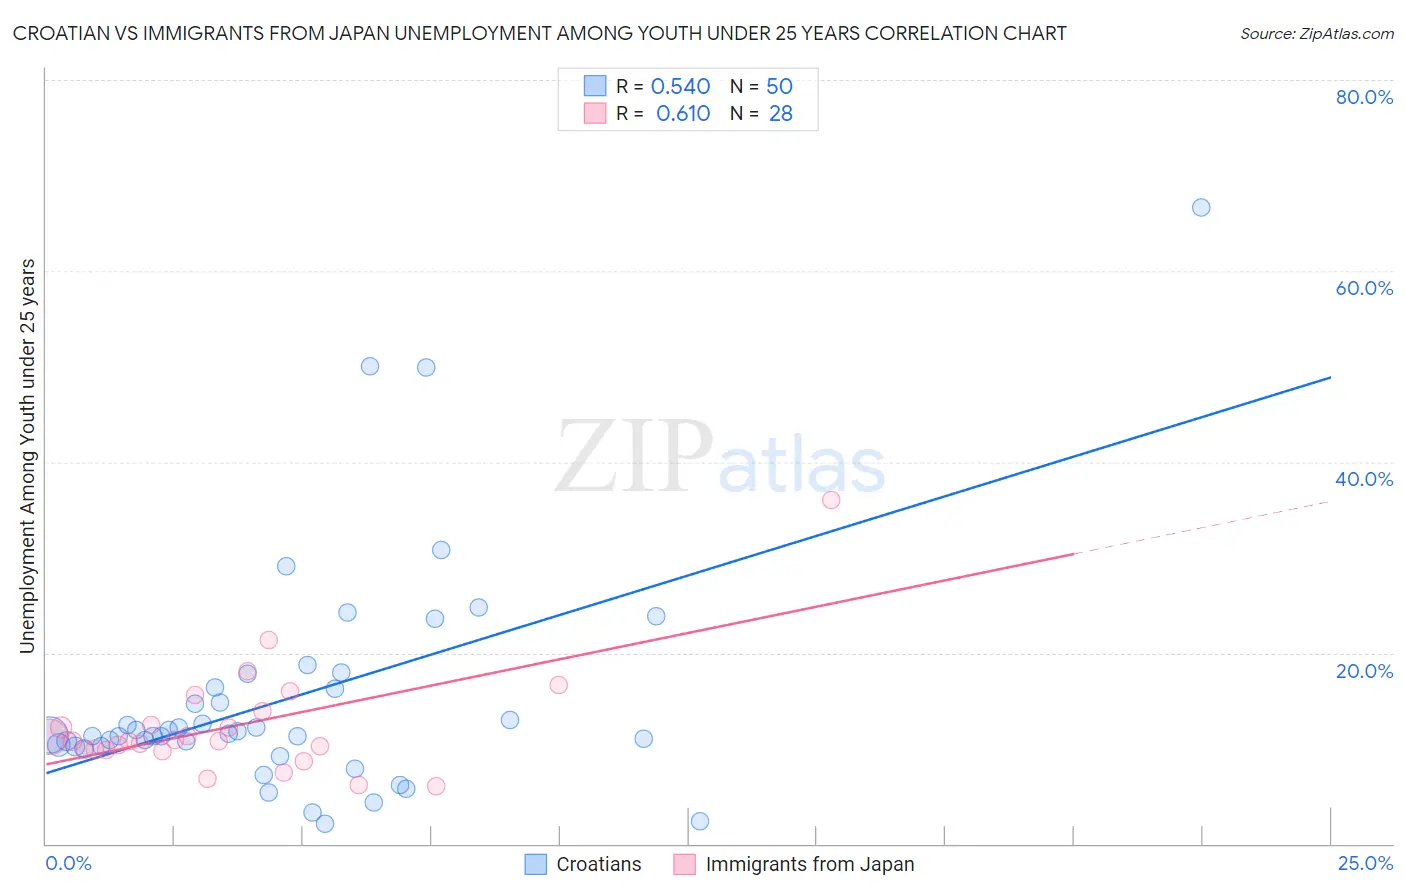 Croatian vs Immigrants from Japan Unemployment Among Youth under 25 years